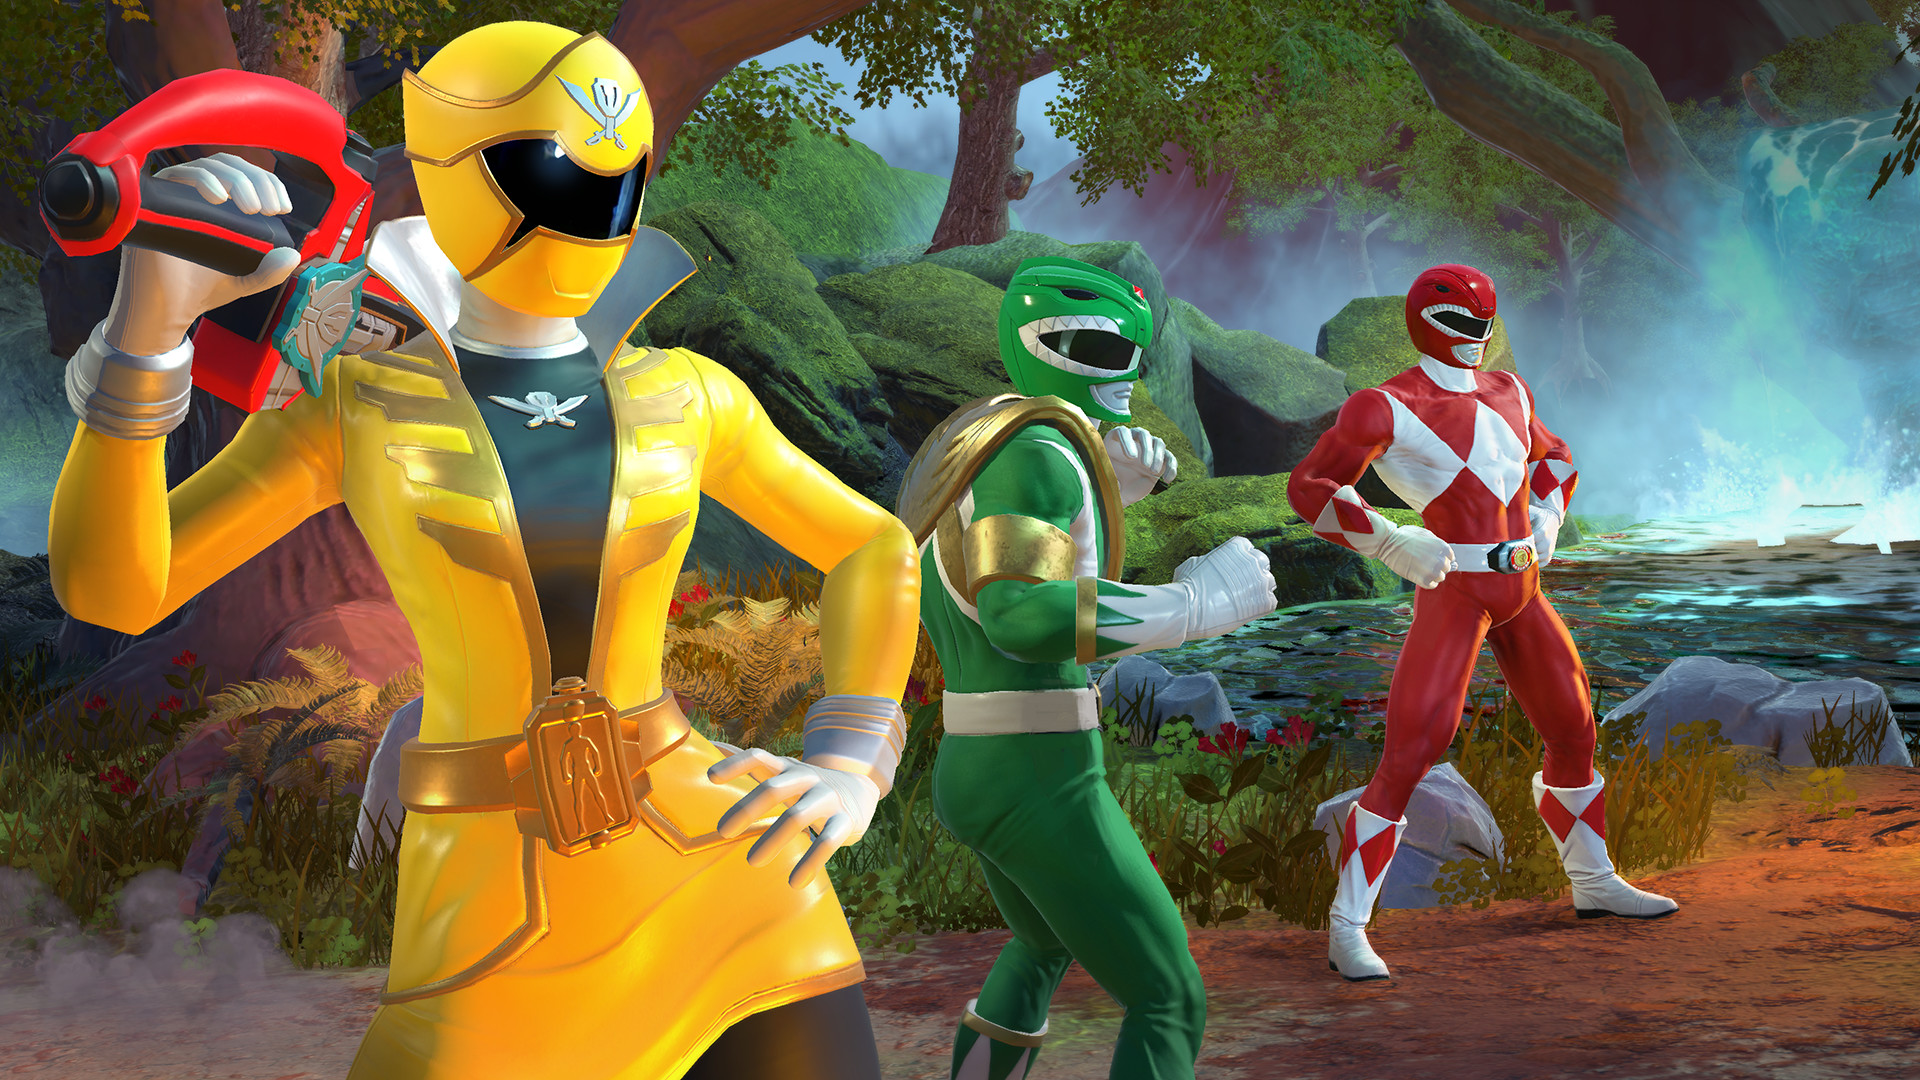 Save 45% on Power Rangers: Battle for the Grid on Steam